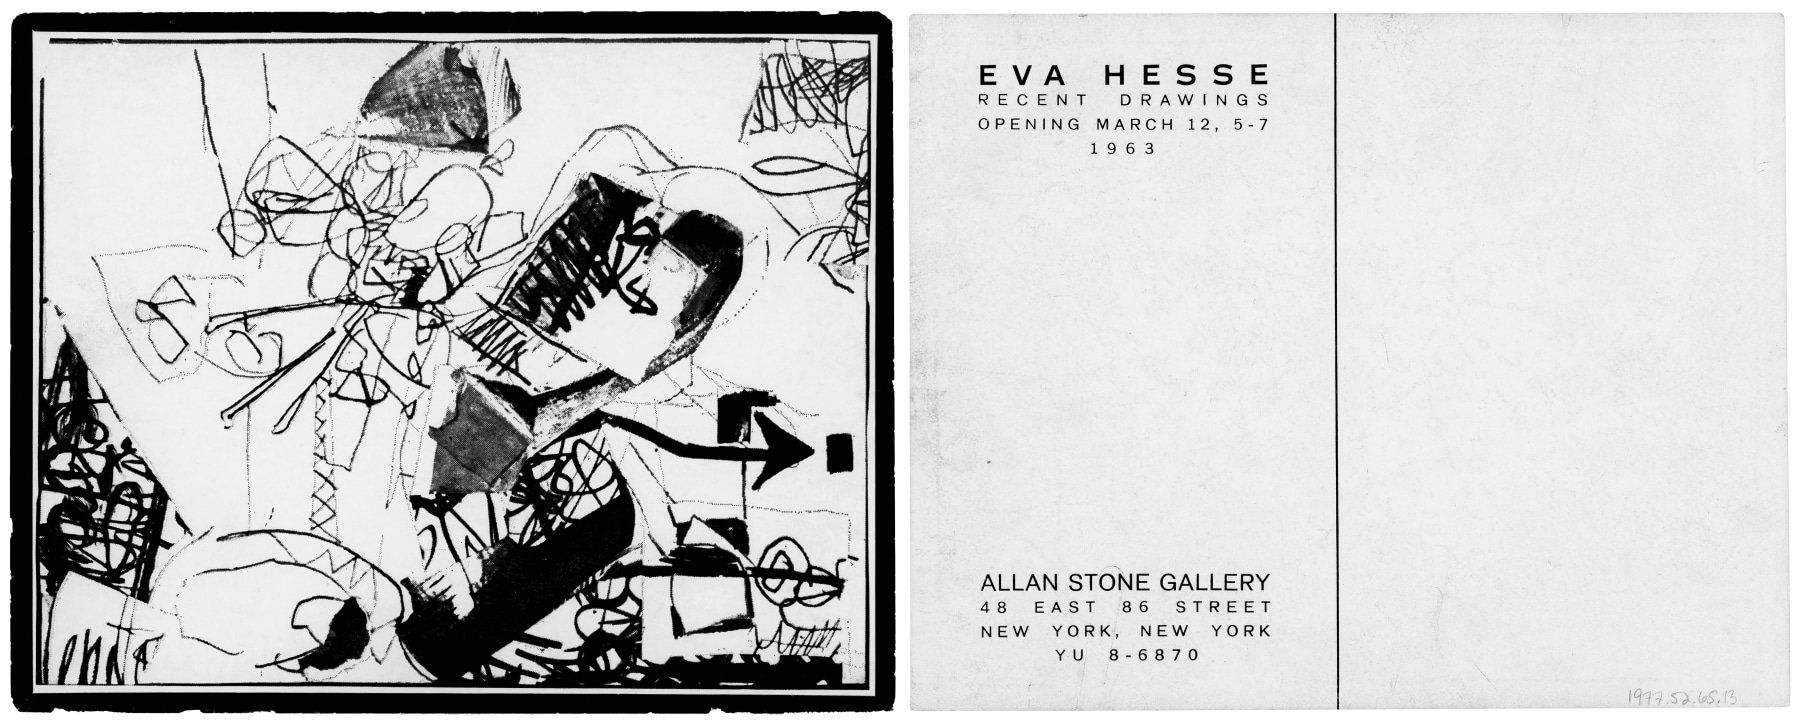 Exhibition announcement for Eva Hesse: Recent Drawings
at the Allan Stone Gallery, March 12, 1963
4 3/4 &amp;times; 6 1/4 inches (12 &amp;times; 17 cm)
Allen Memorial Art Museum;
Gift of Helen Hesse Charash, 1977.52.65.13
Photos courtesy Allen Memorial Art Museum.